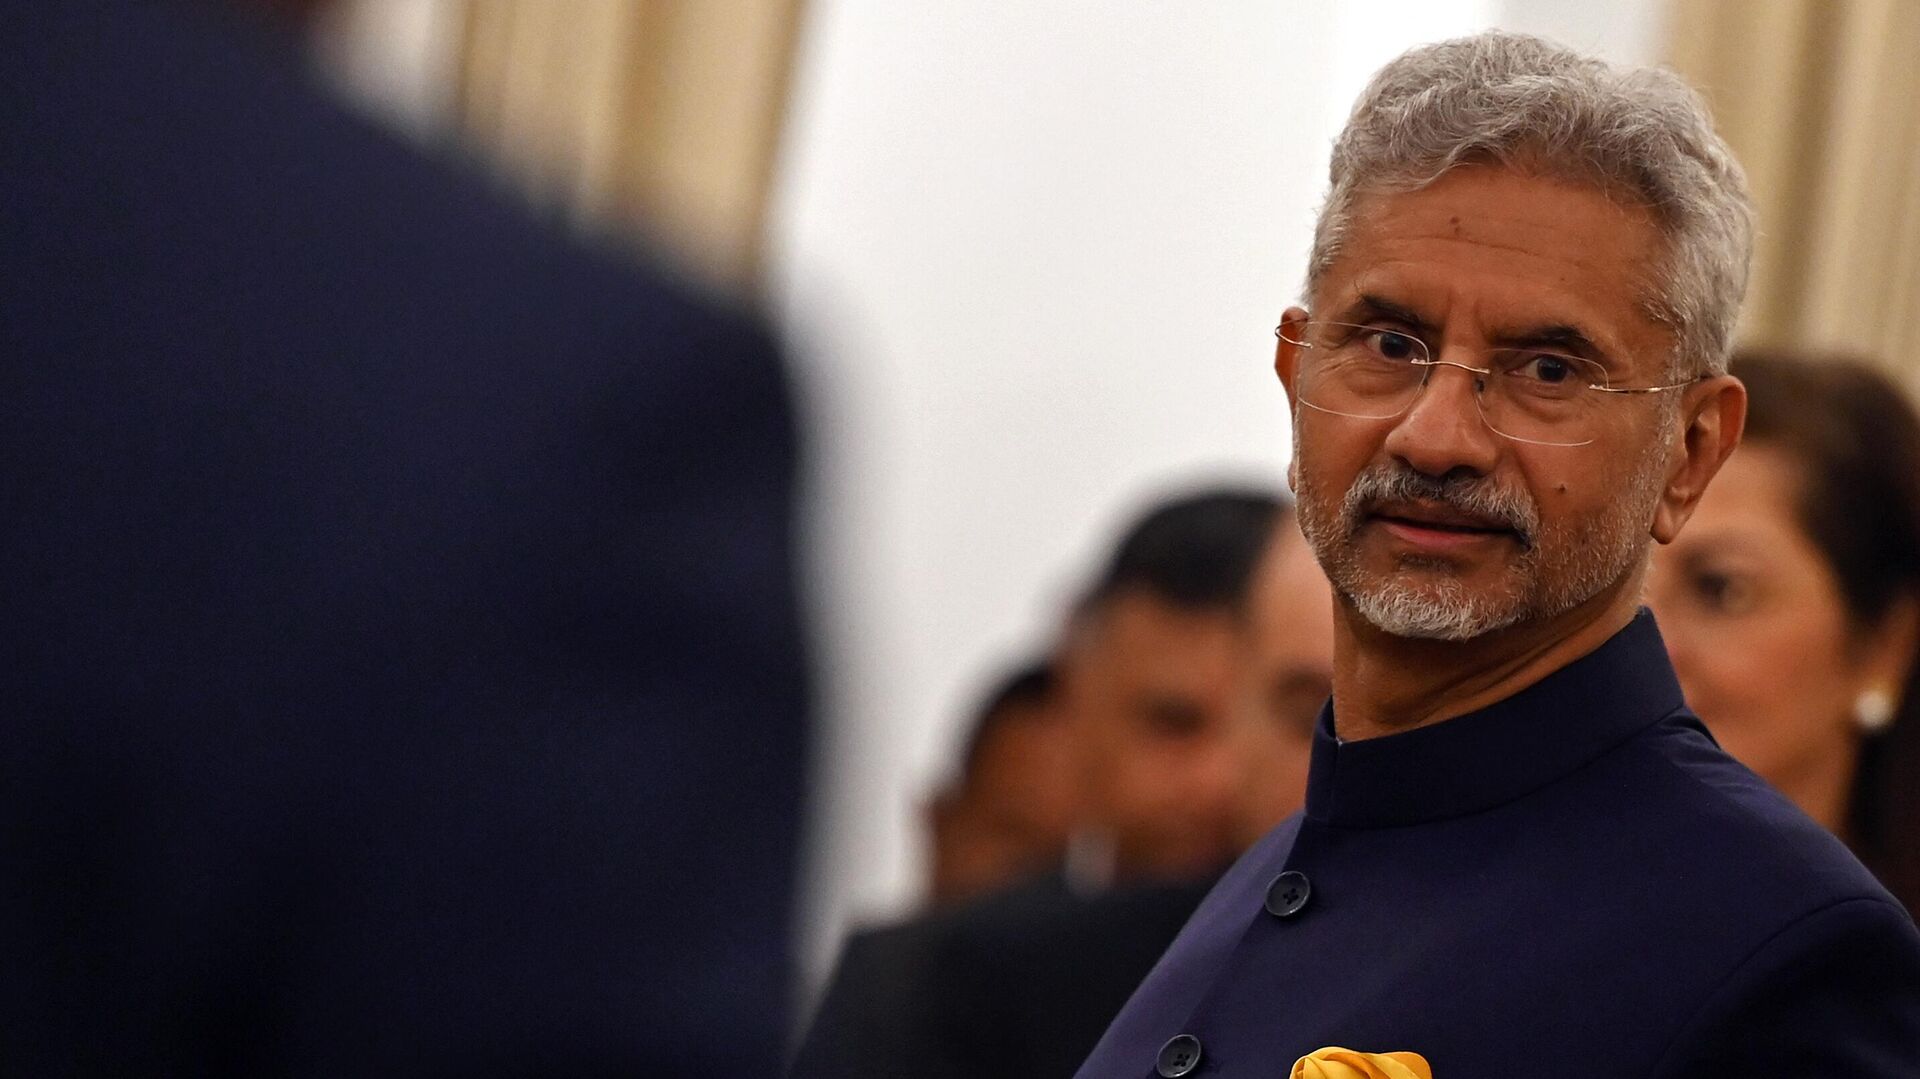 India's Foreign Minister Subrahmanyam Jaishankar attends the exchange of agreements ceremony between India’s Prime Minister Narendra Modi and Egypt’s President Abdel Fattah al-Sisi at the Hyderabad House in New Delhi on January 25, 2023. - Sputnik India, 1920, 15.02.2023